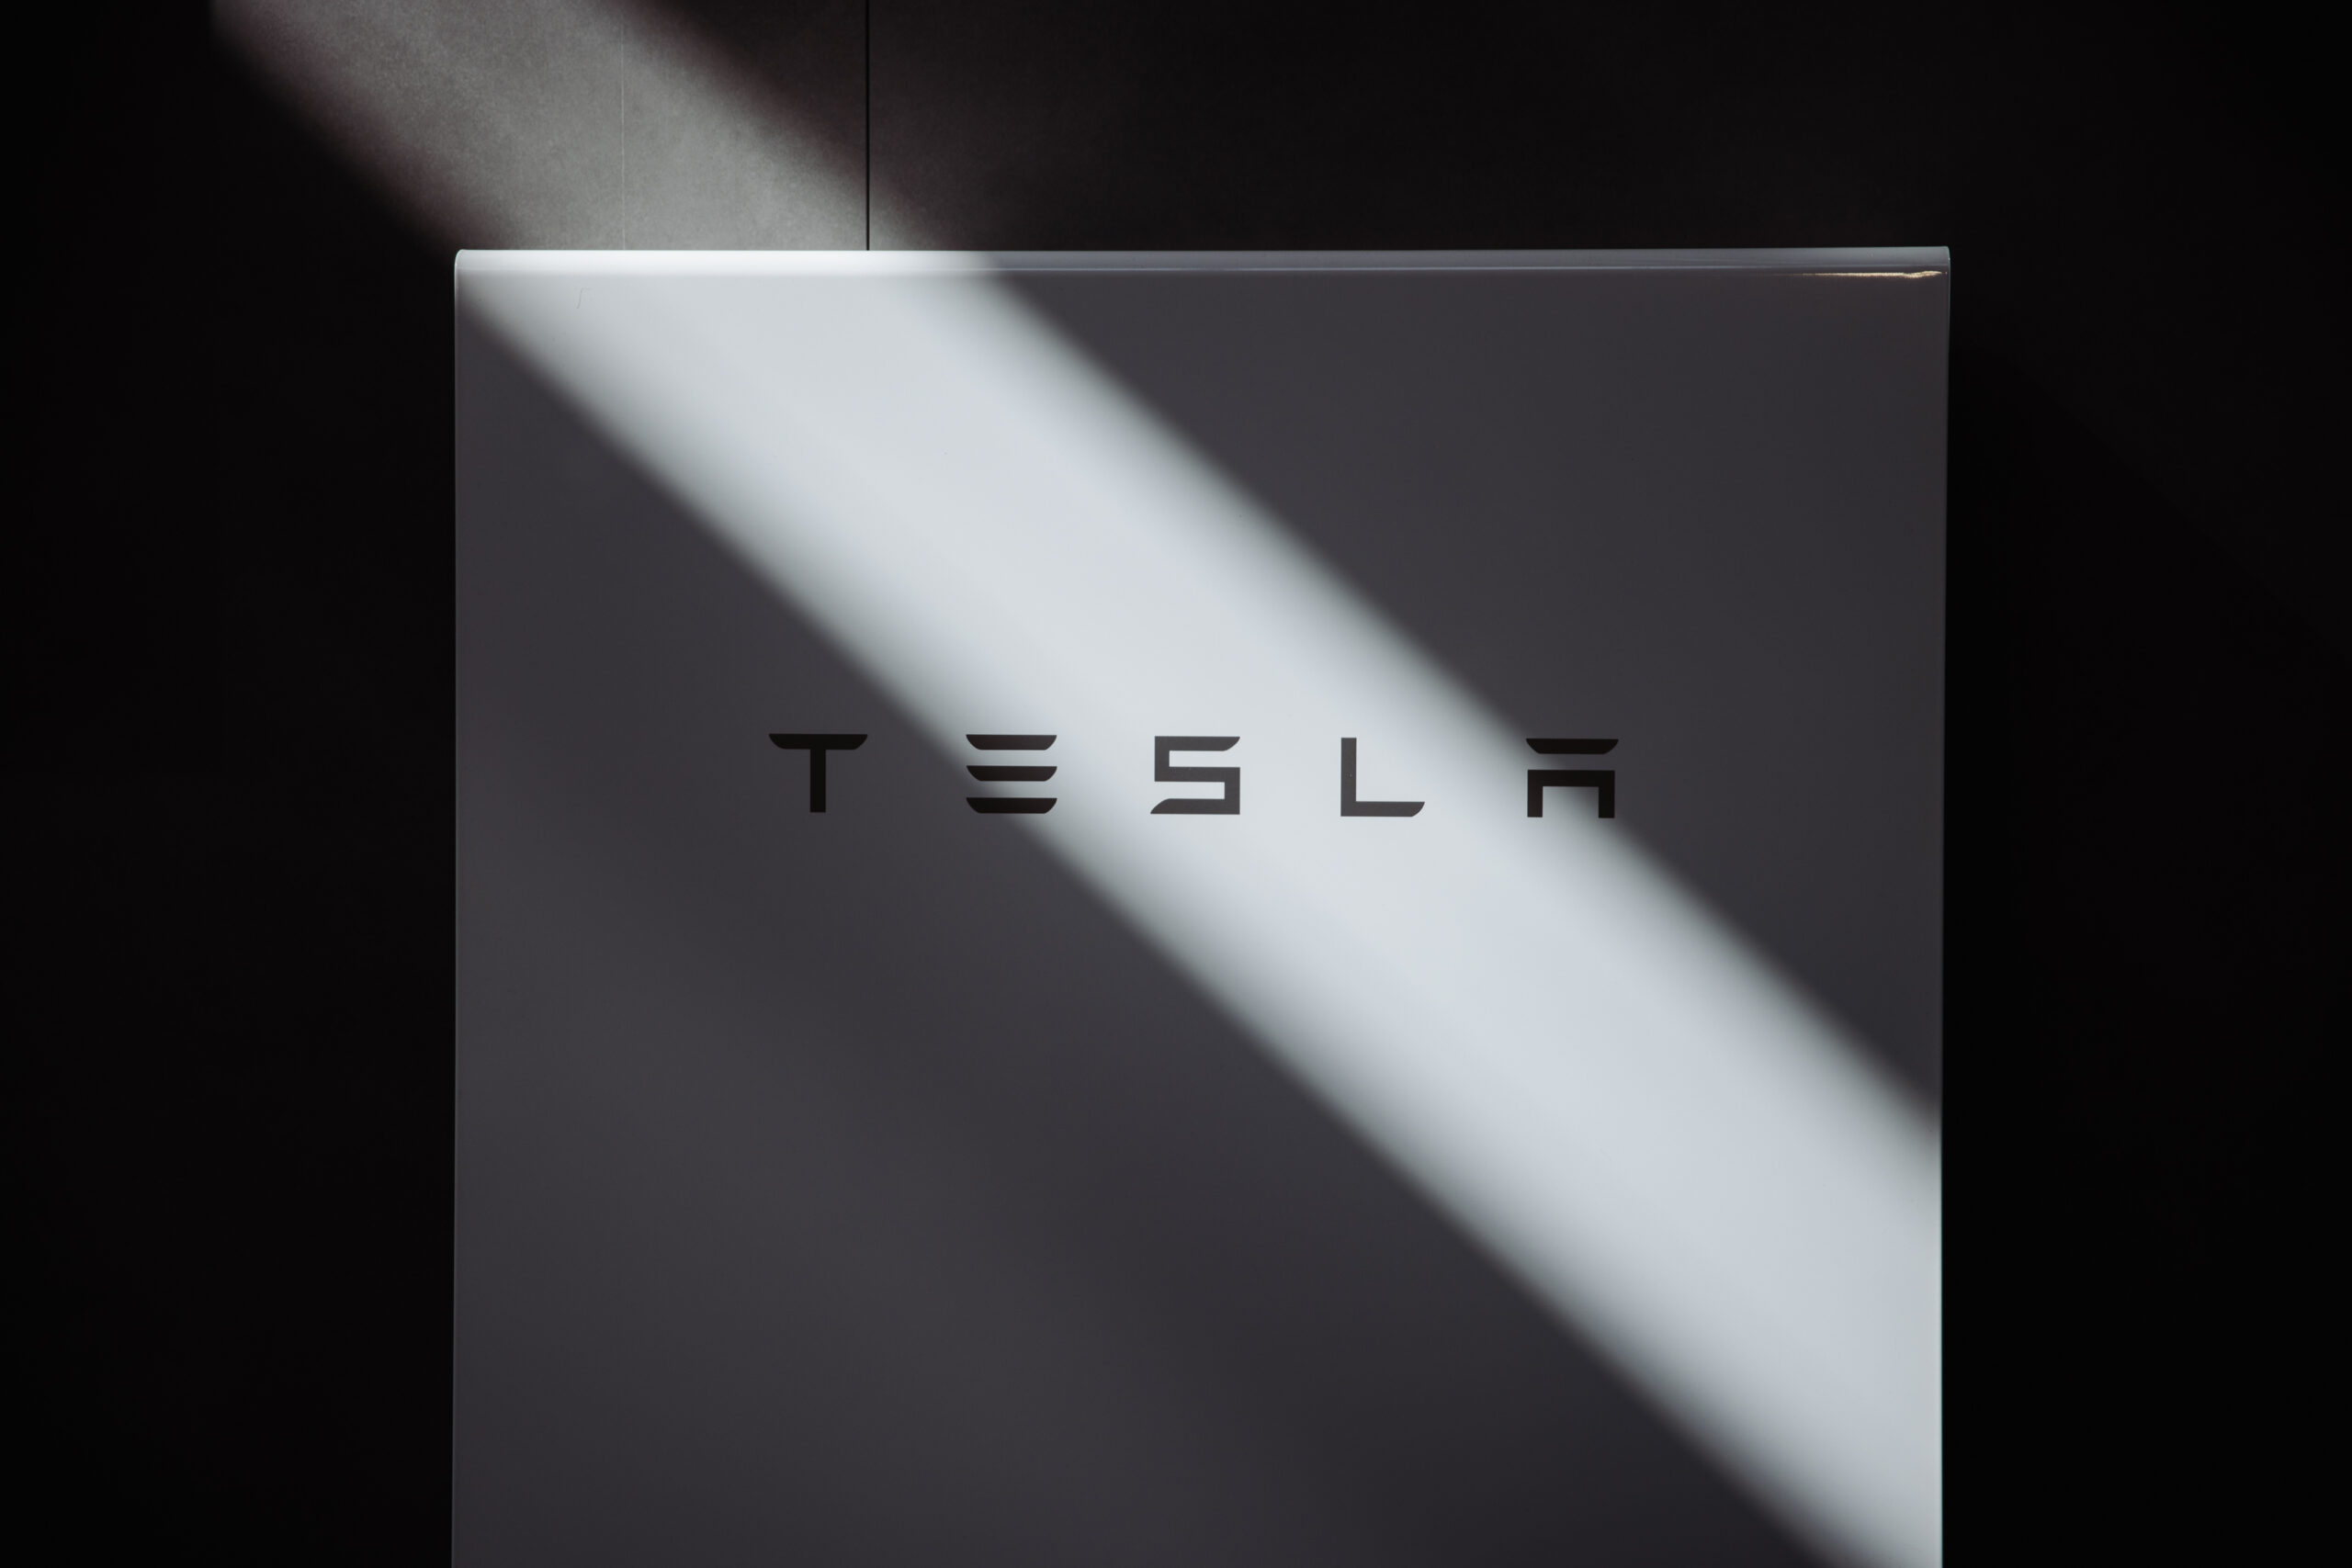 Powerwall 2 in the shadows (black & white) for Perth's first Tesla Energy Tech Talk